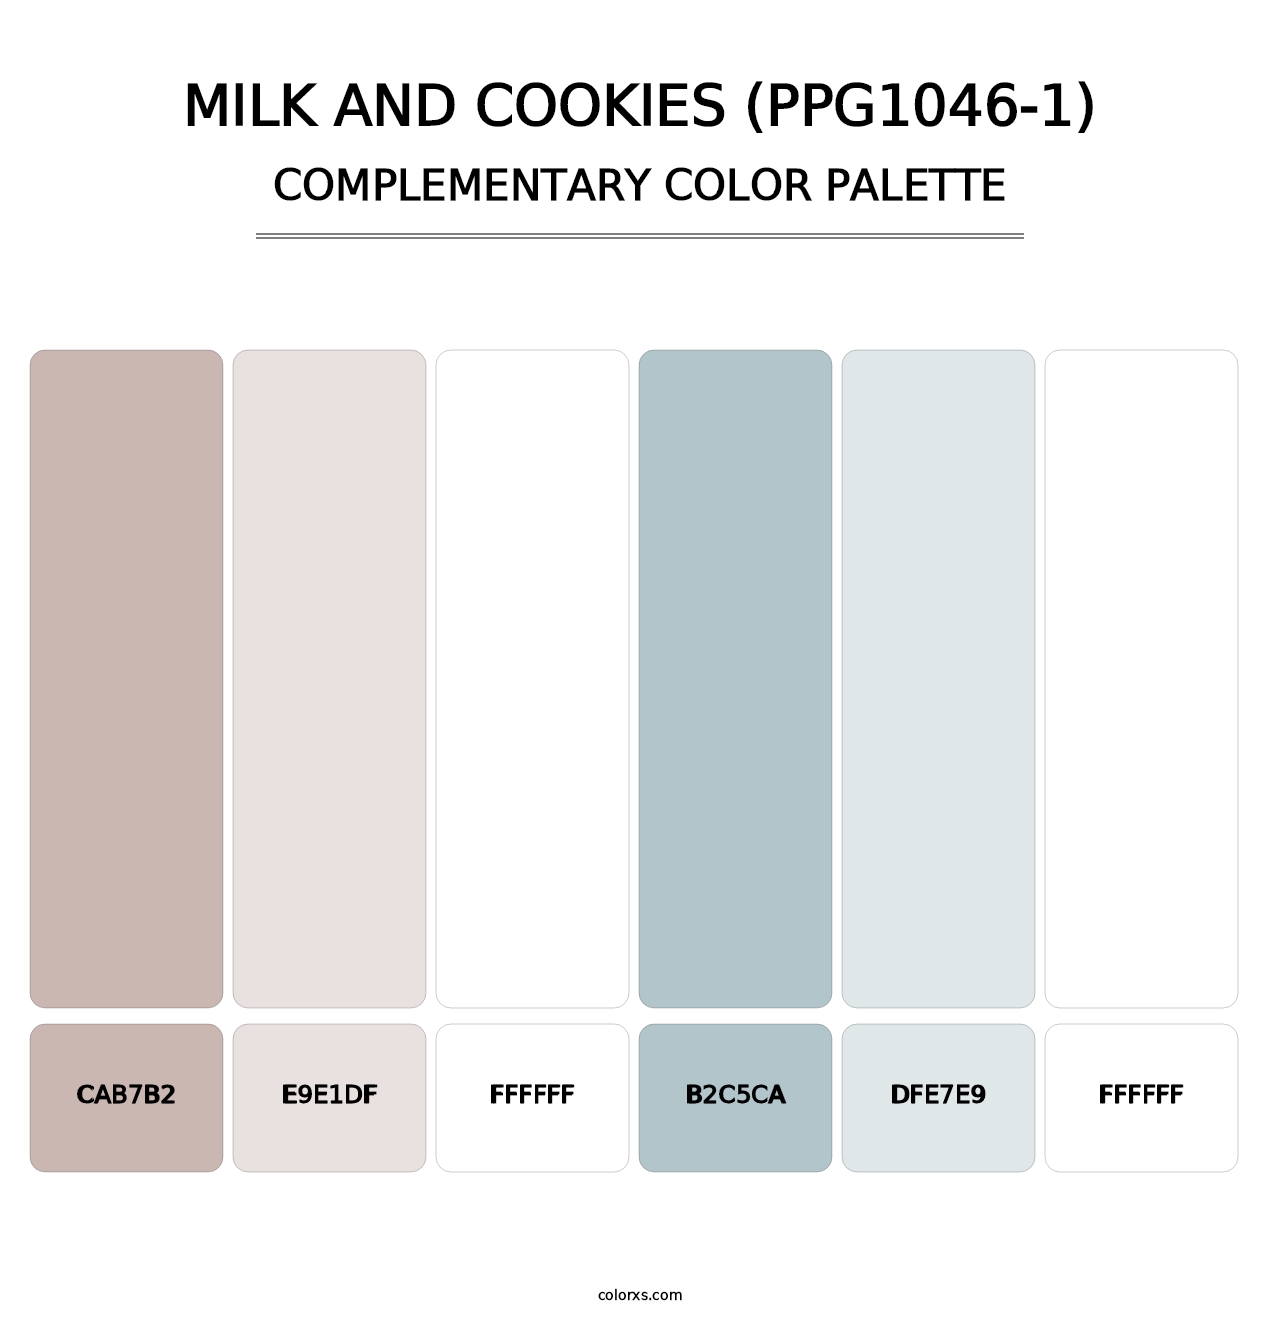 Milk And Cookies (PPG1046-1) - Complementary Color Palette